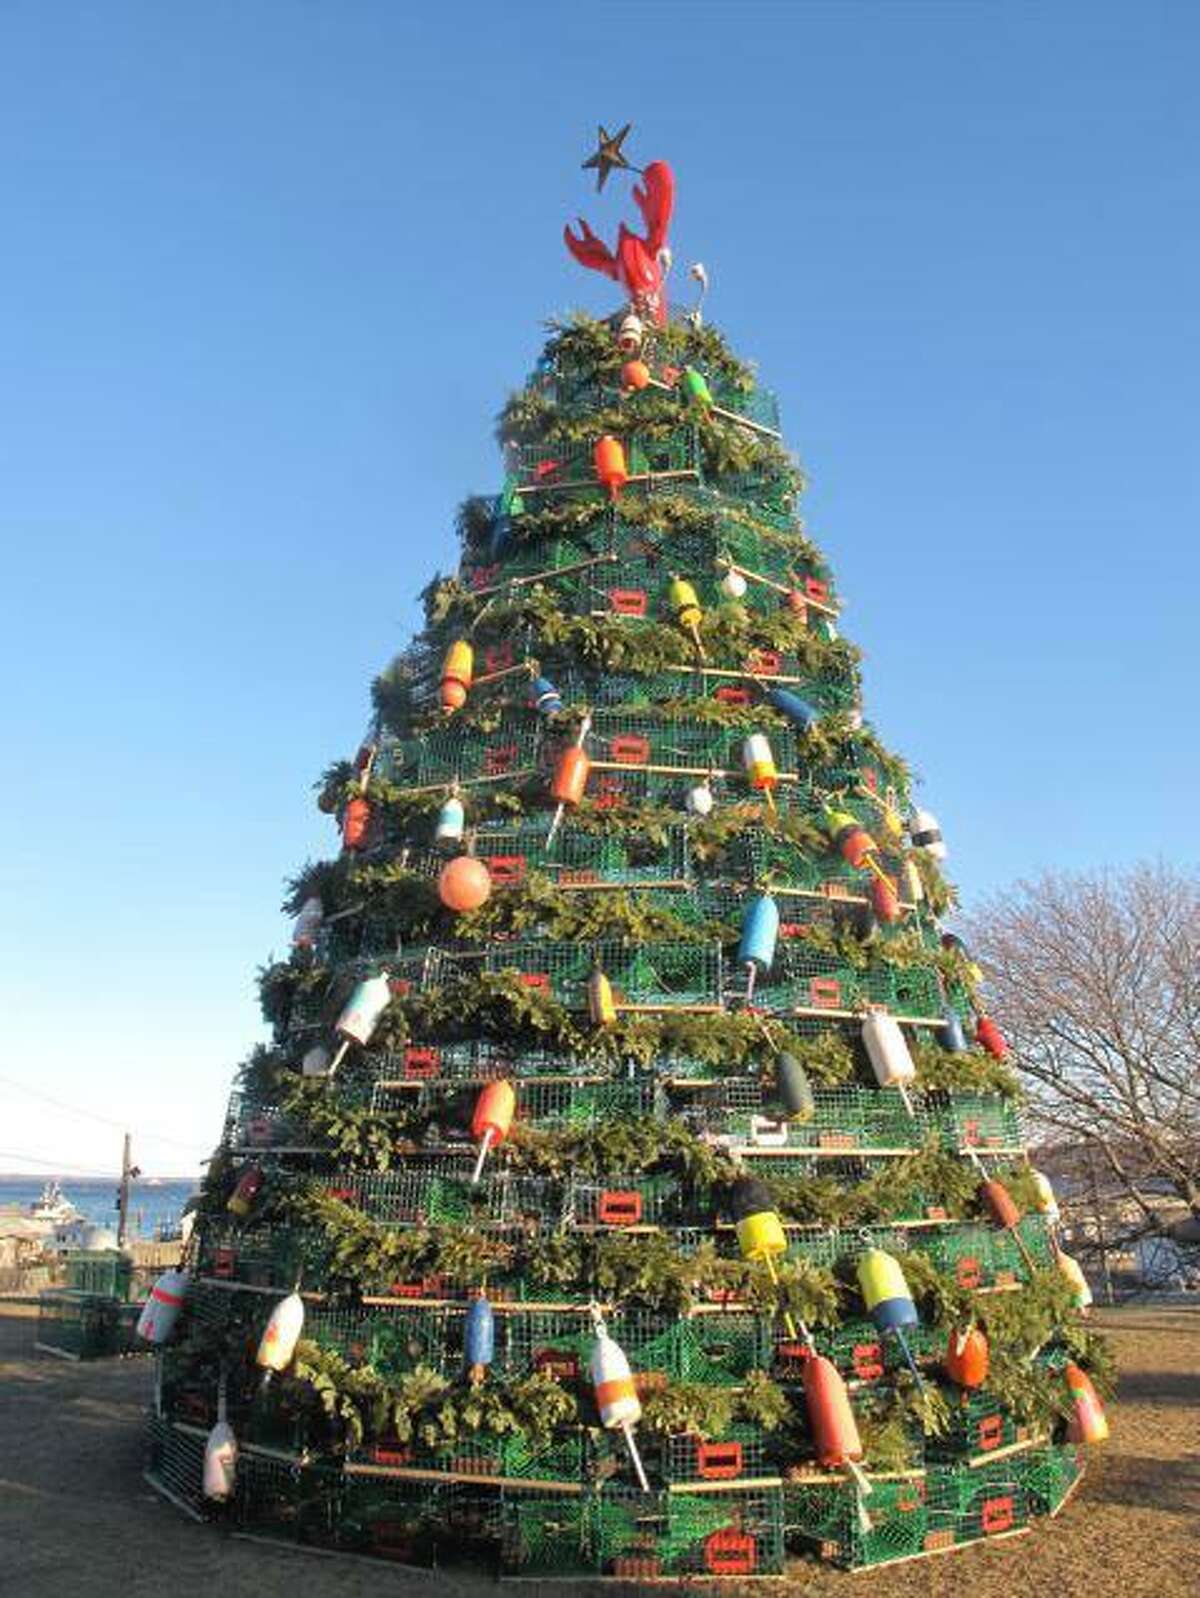 The Downtown Milford Business Association partnering with the Milford Arts Council are creating a Lobster Tree Trap Christmas Tree like the one seen in this photo. The tree will be located at the end of High Street just passed the Historical Society.